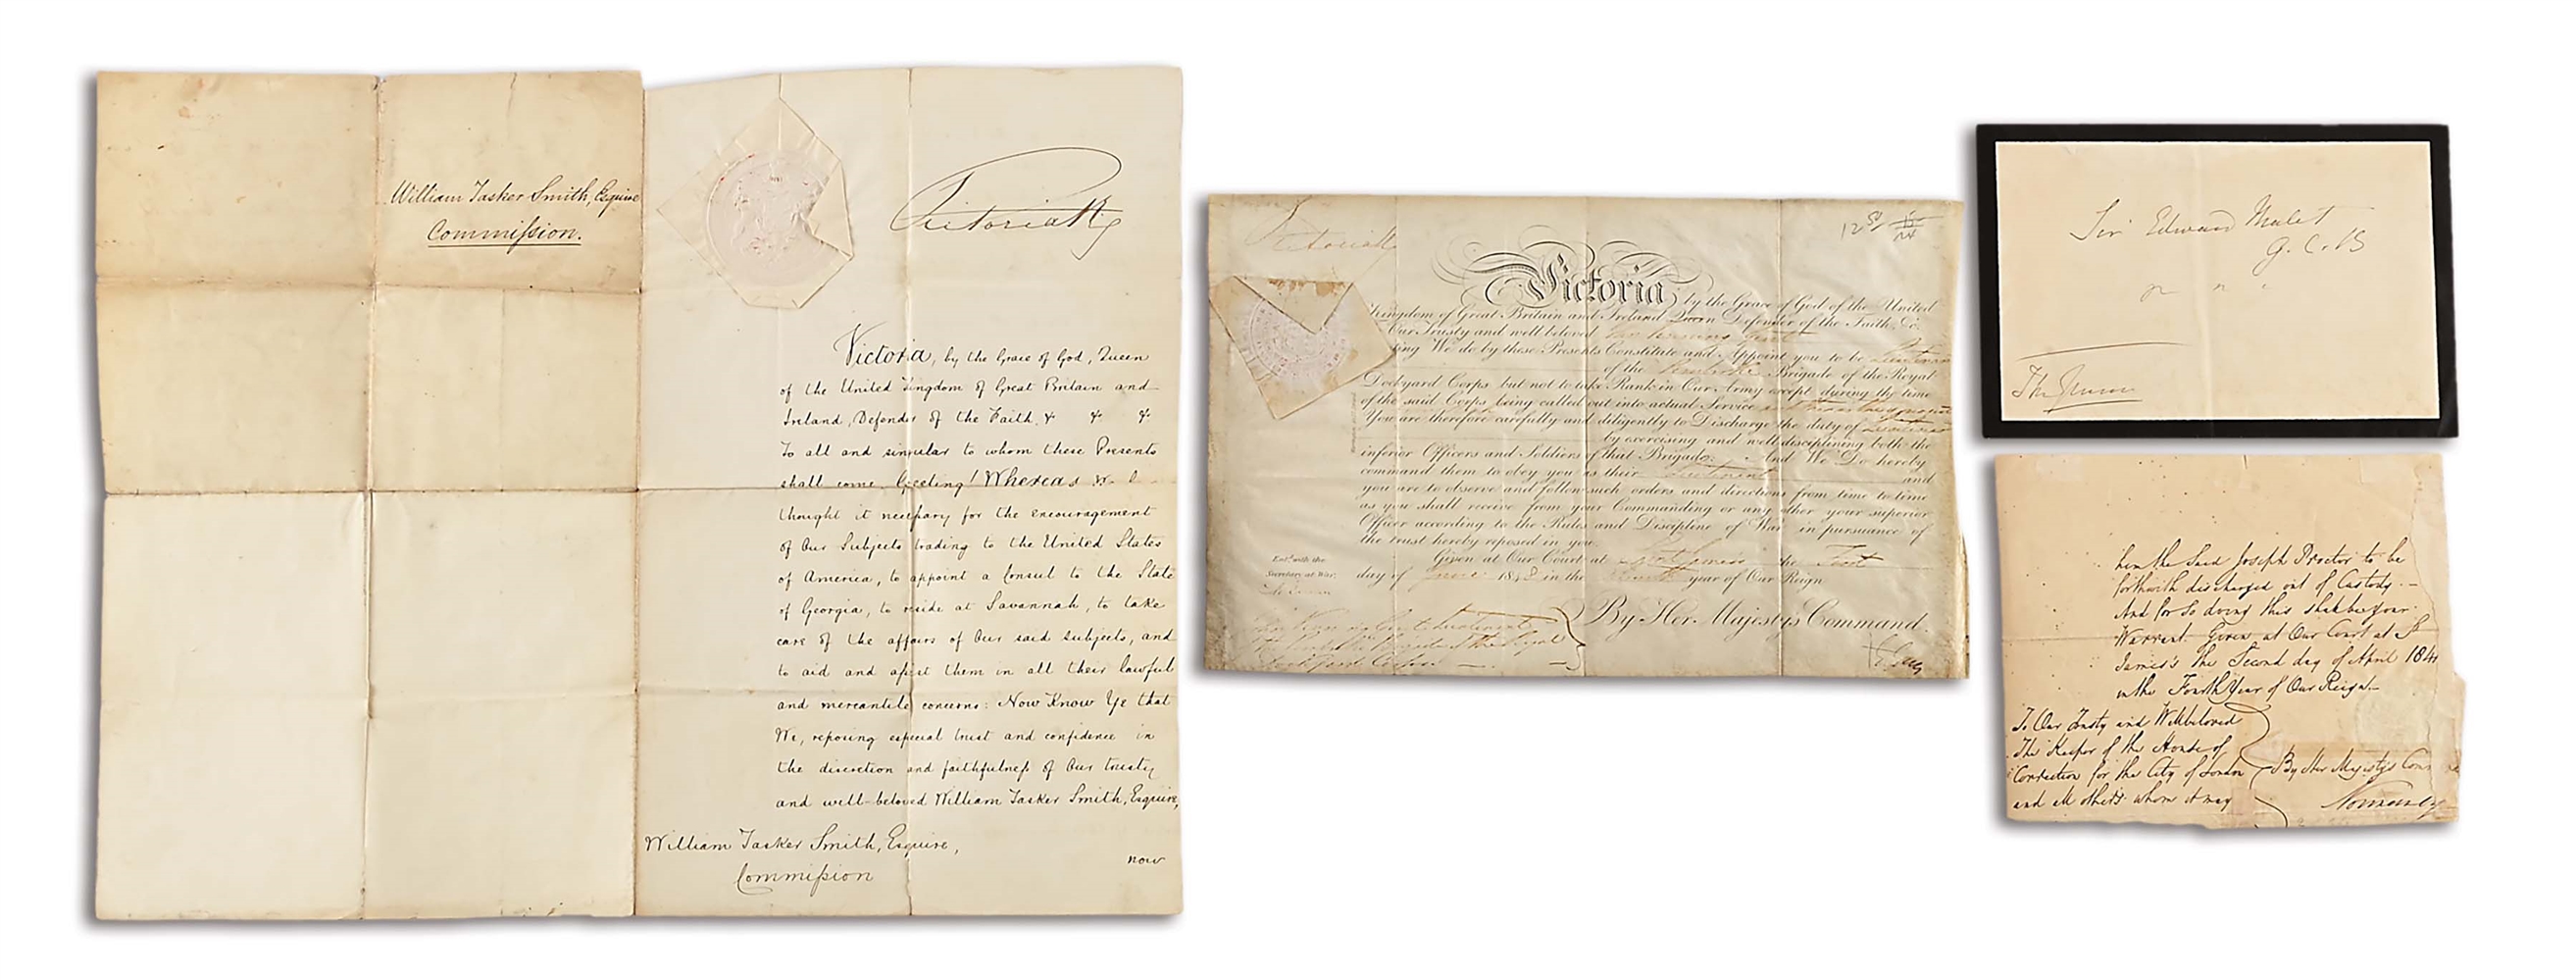 LOT OF 3: DOCUMENTS SIGNED BY QUEEN VICTORIA, EX-LATTIMER.